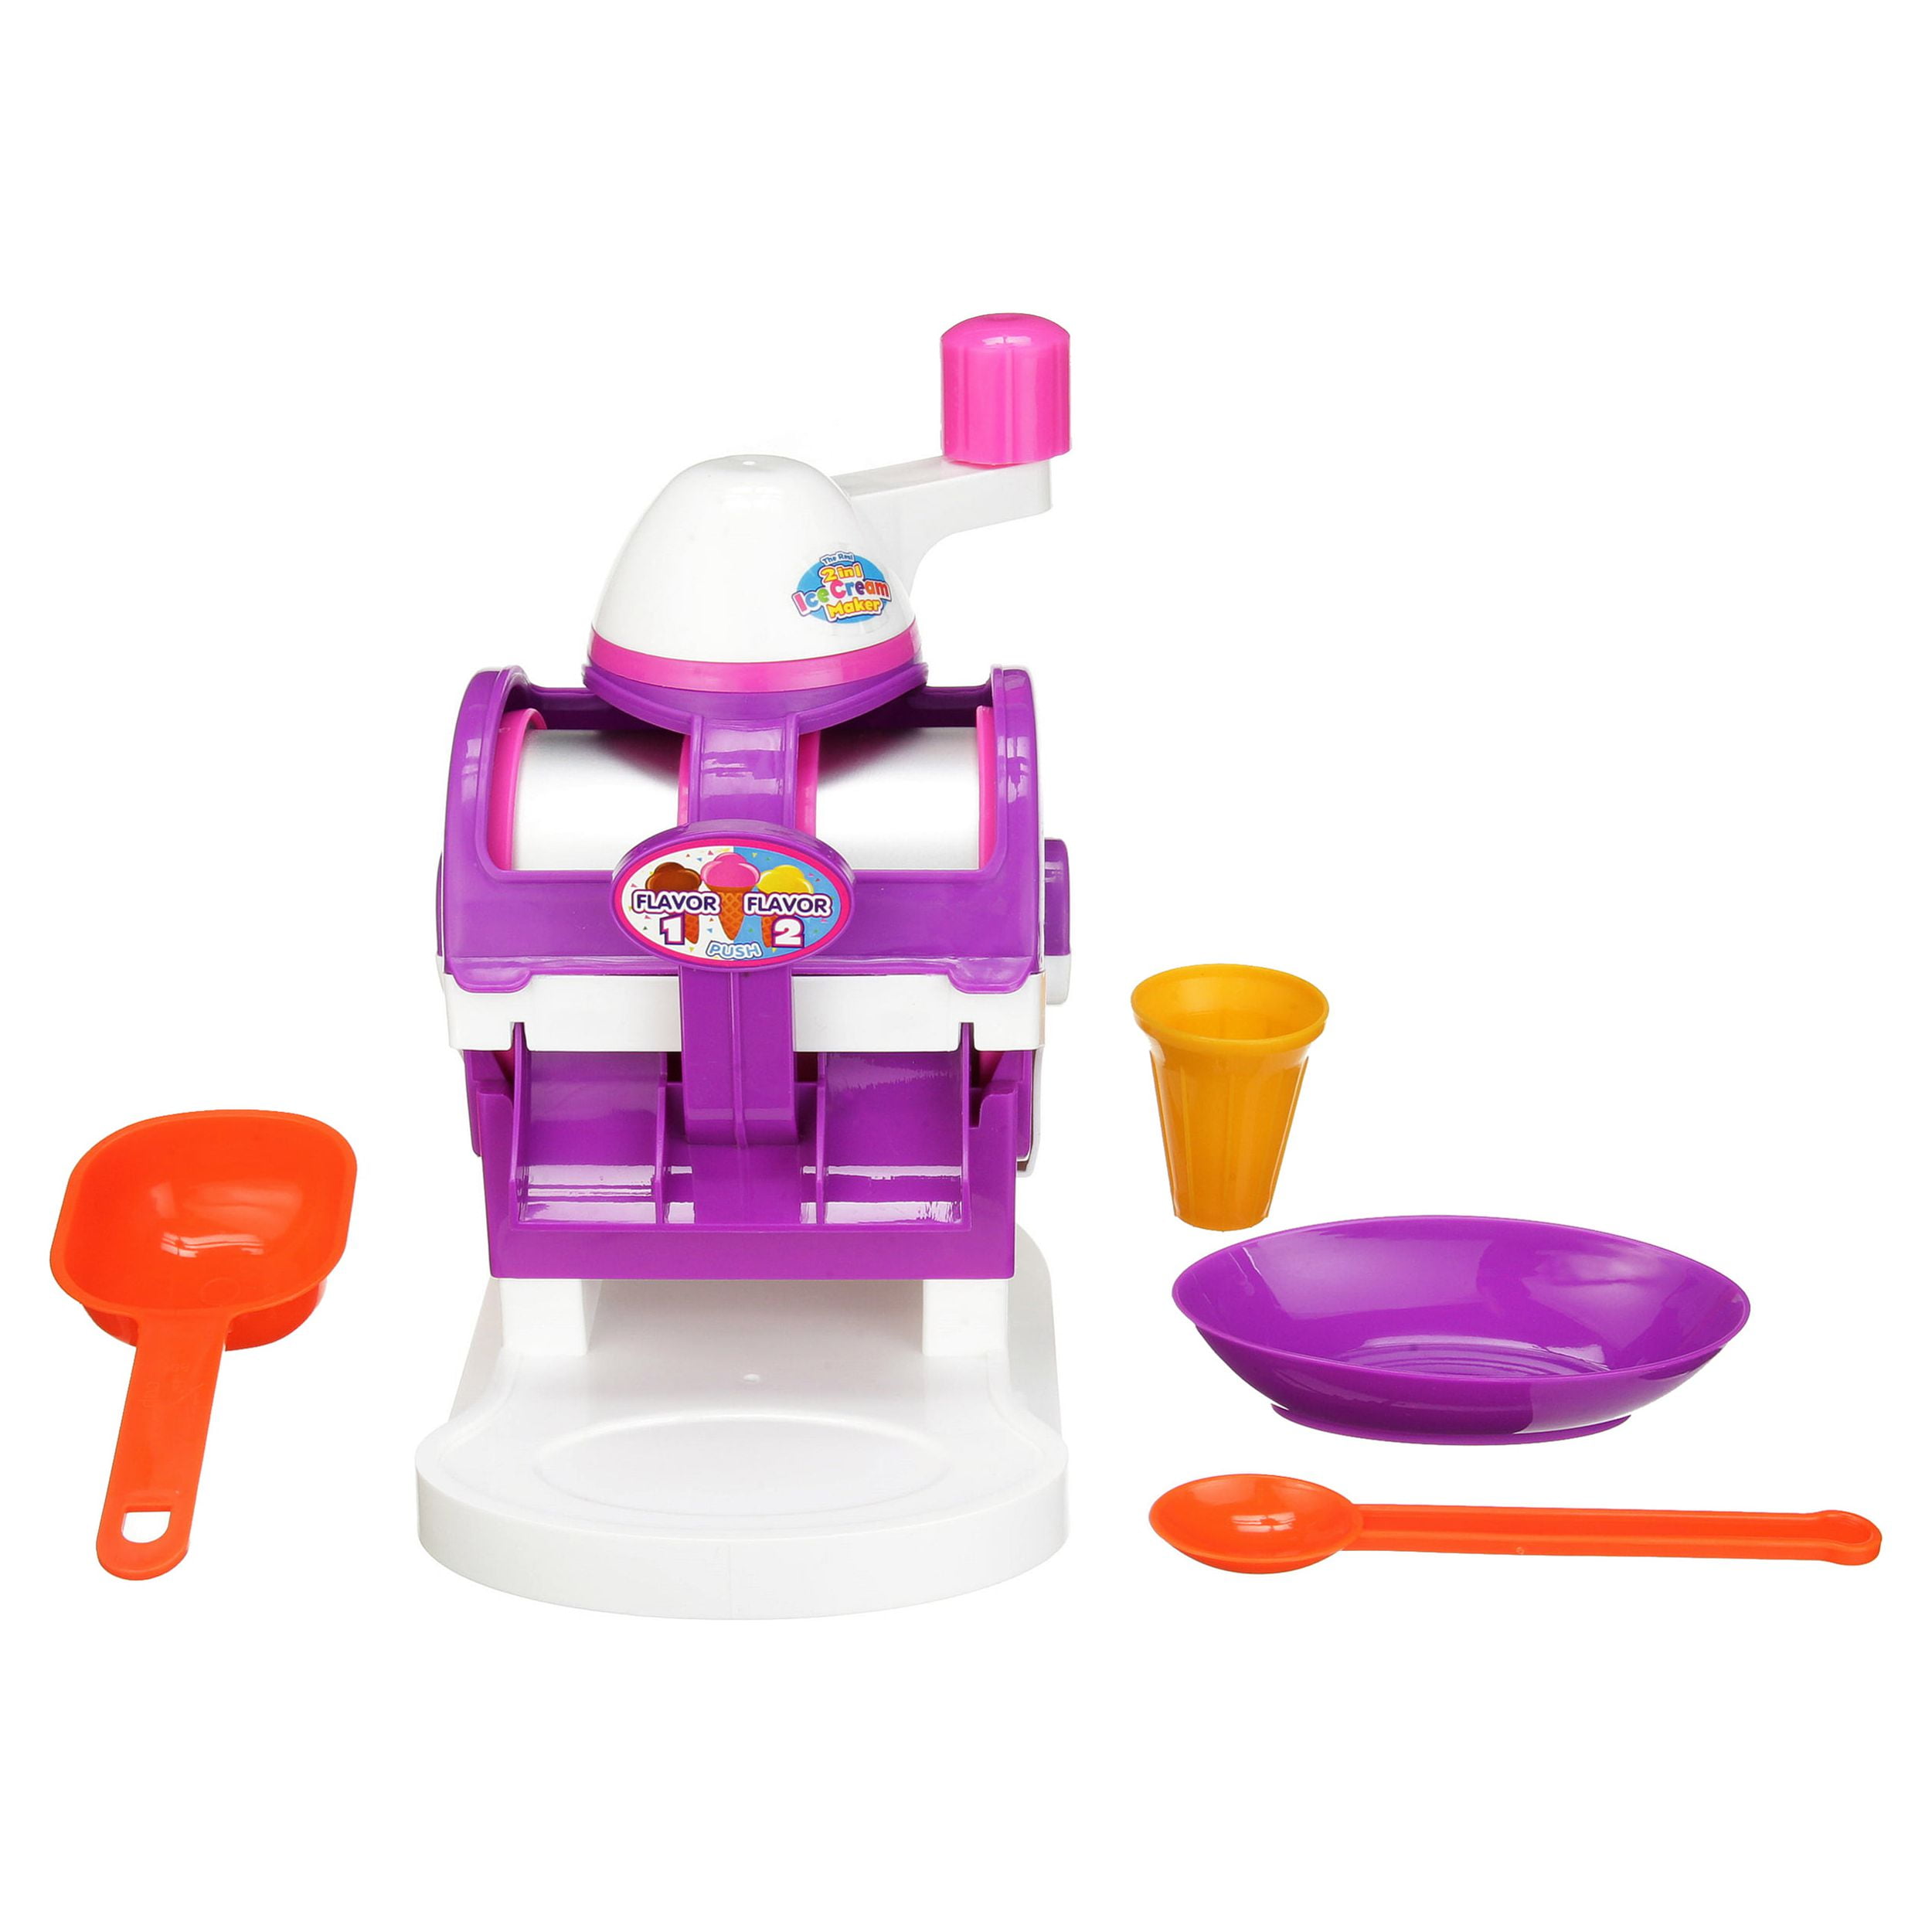 TOY Review The Real Two in One Ice Cream Maker Cra-Z-Art Video 